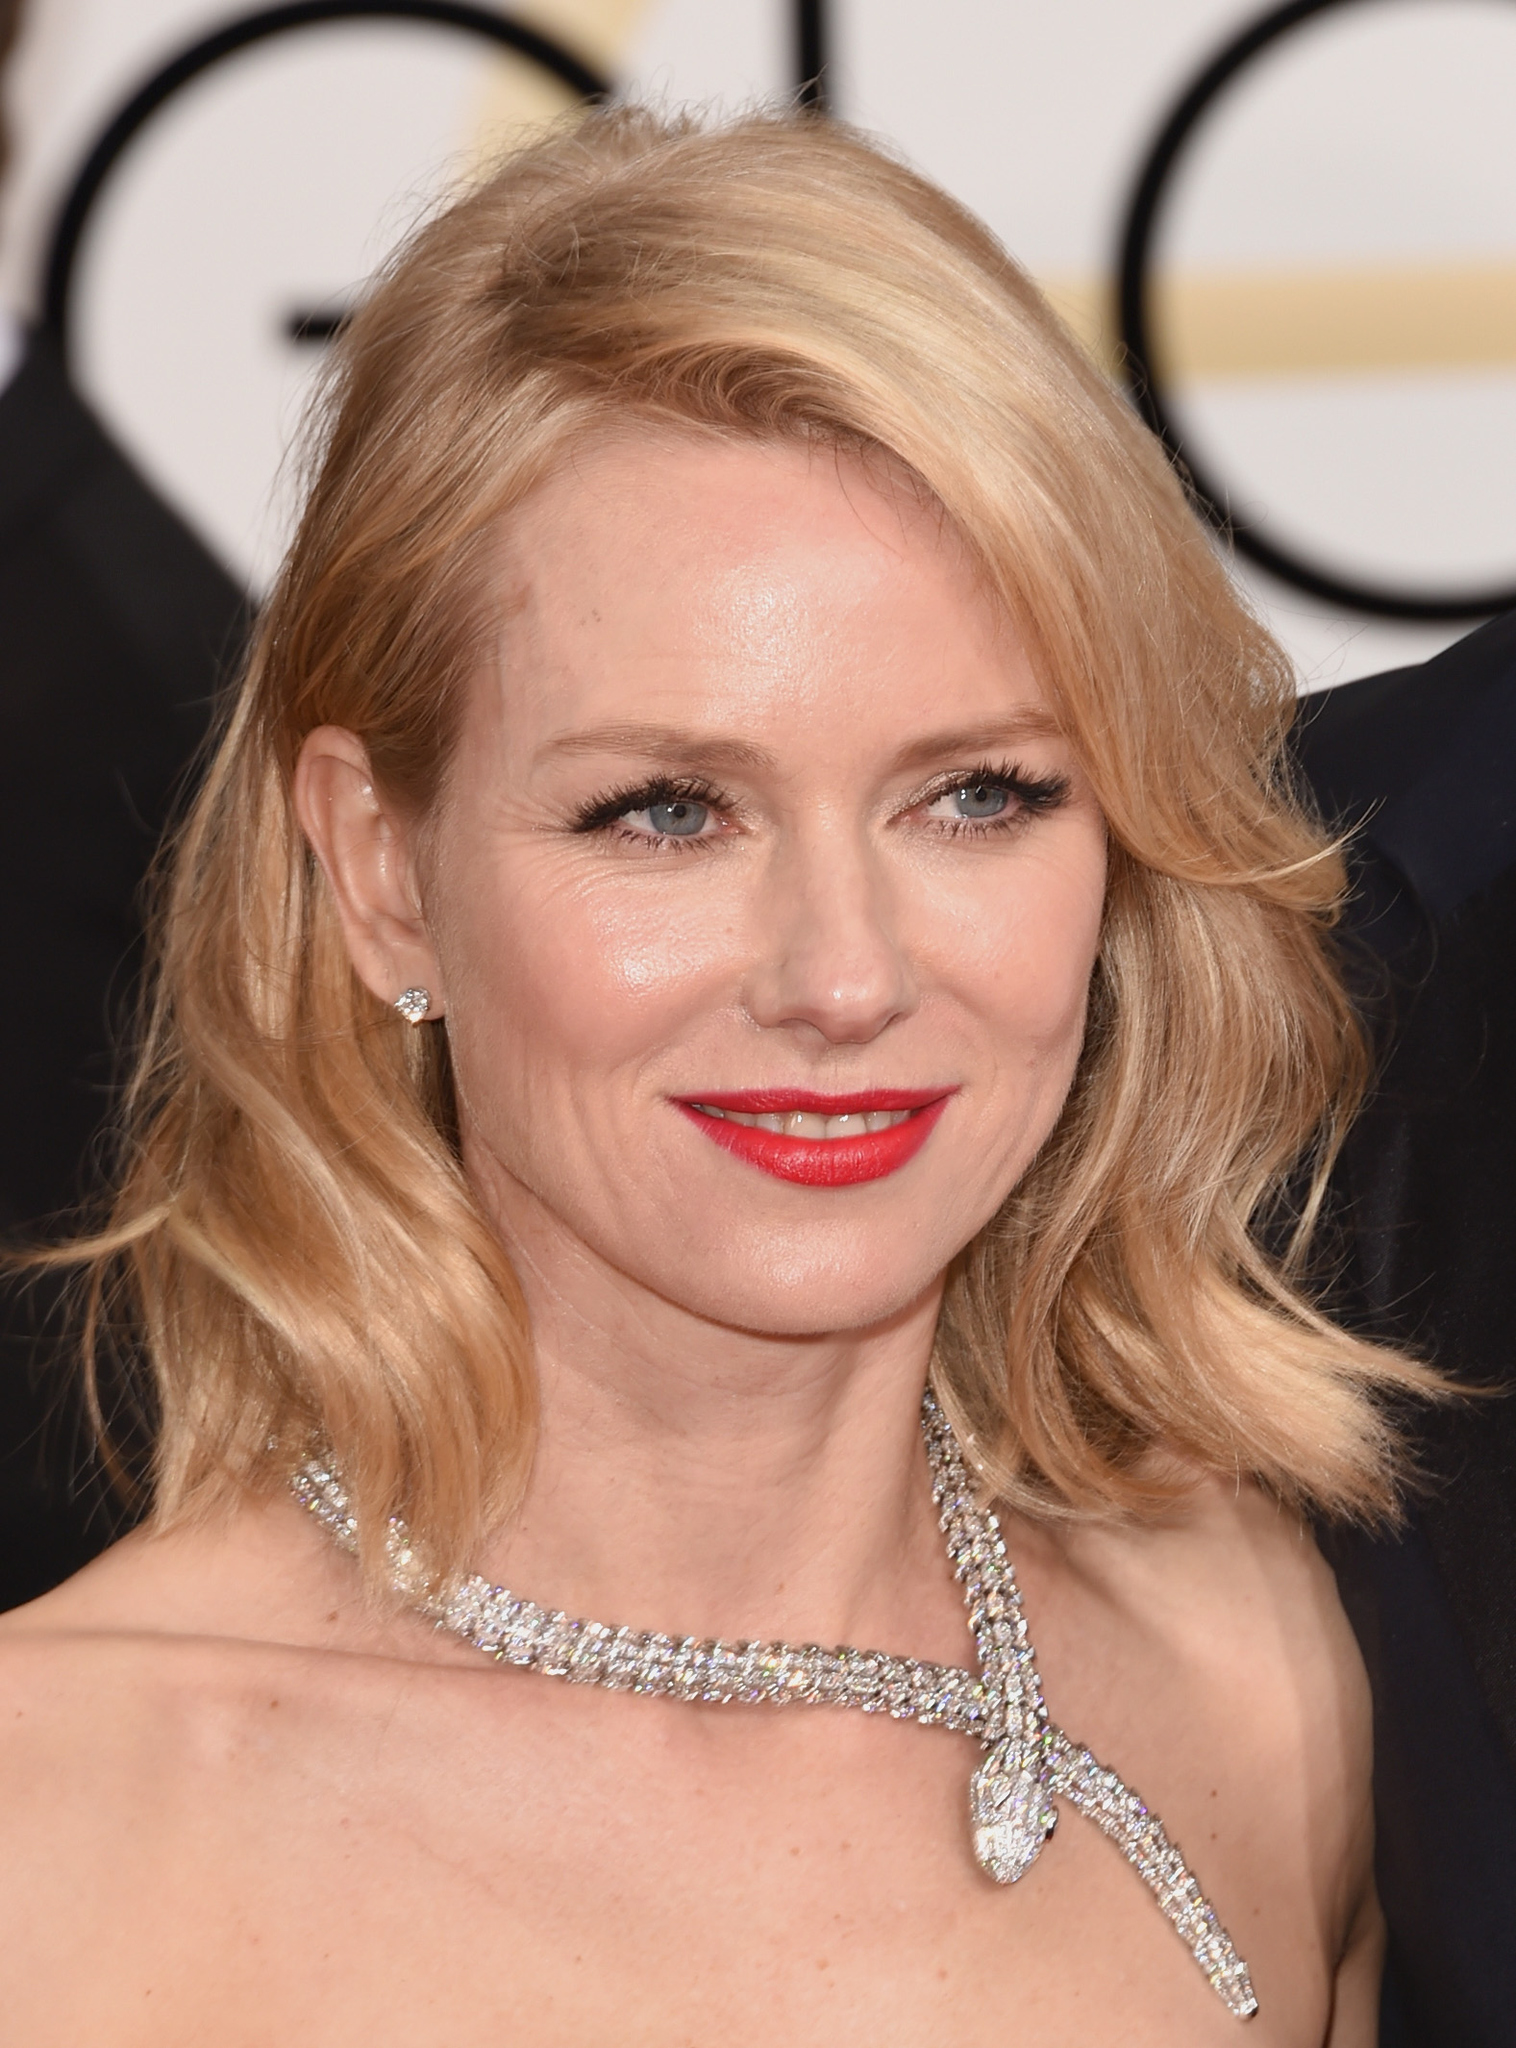 Naomi Watts at event of The 72nd Annual Golden Globe Awards (2015)